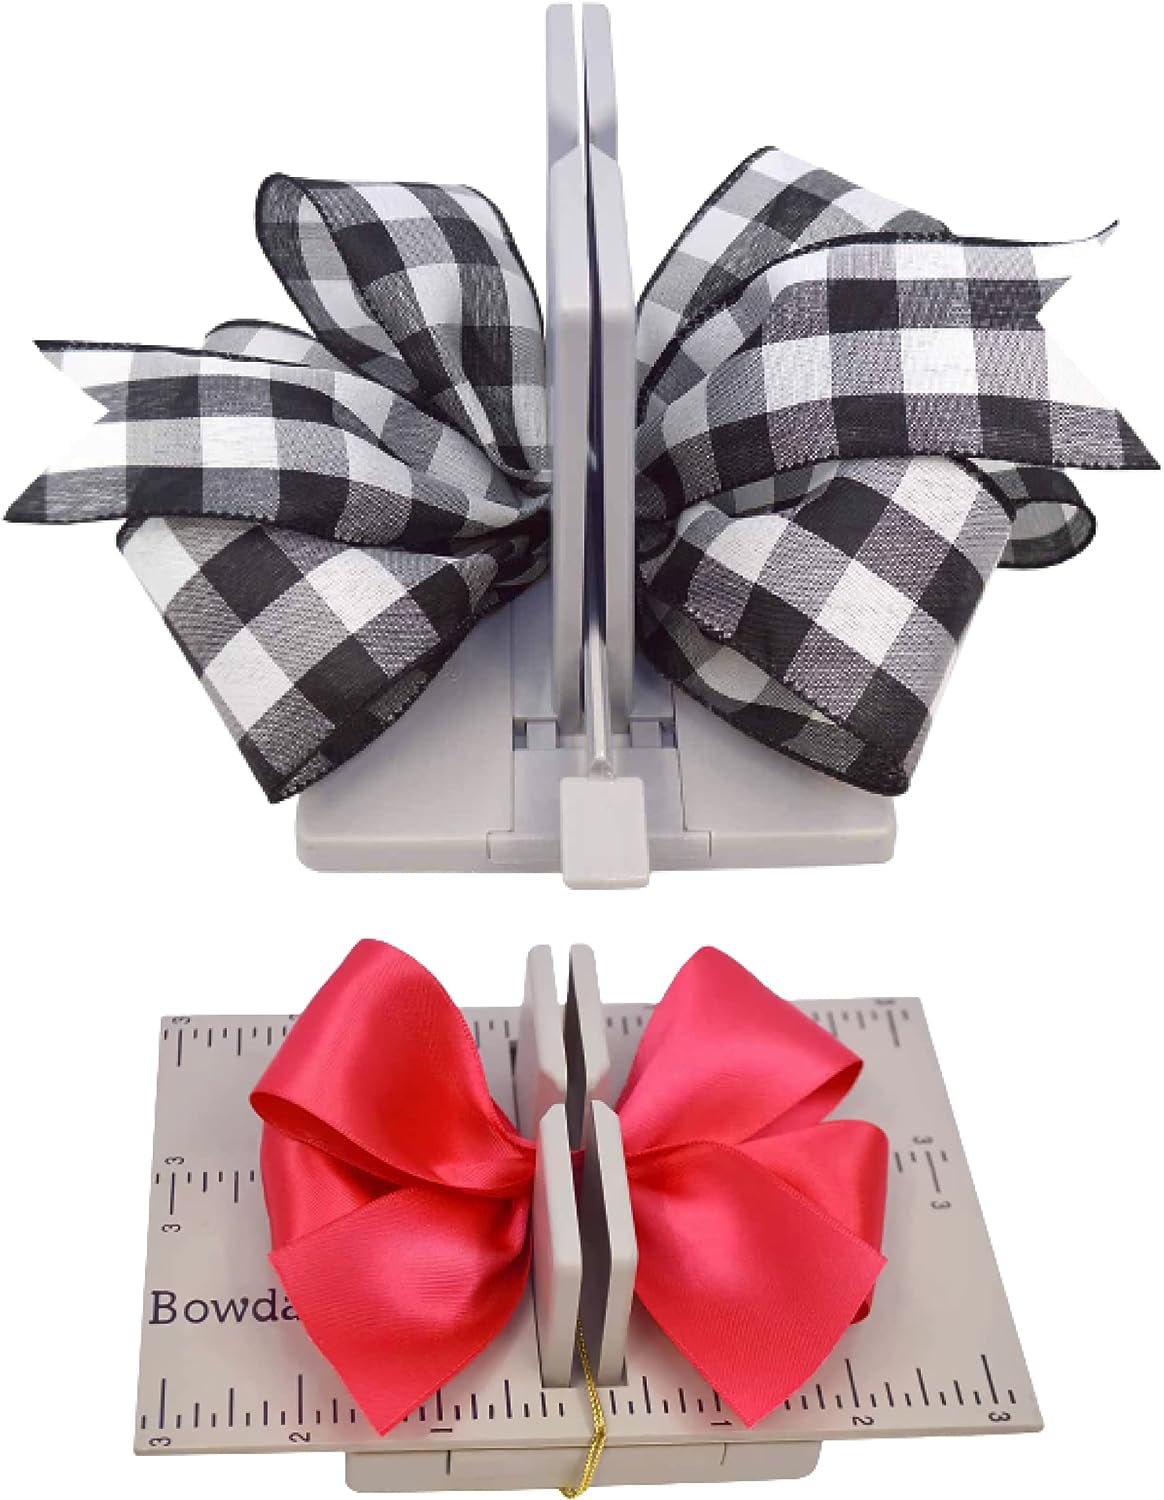 Bowdabra Combo Pack - Hairbow making kit, bows, decor